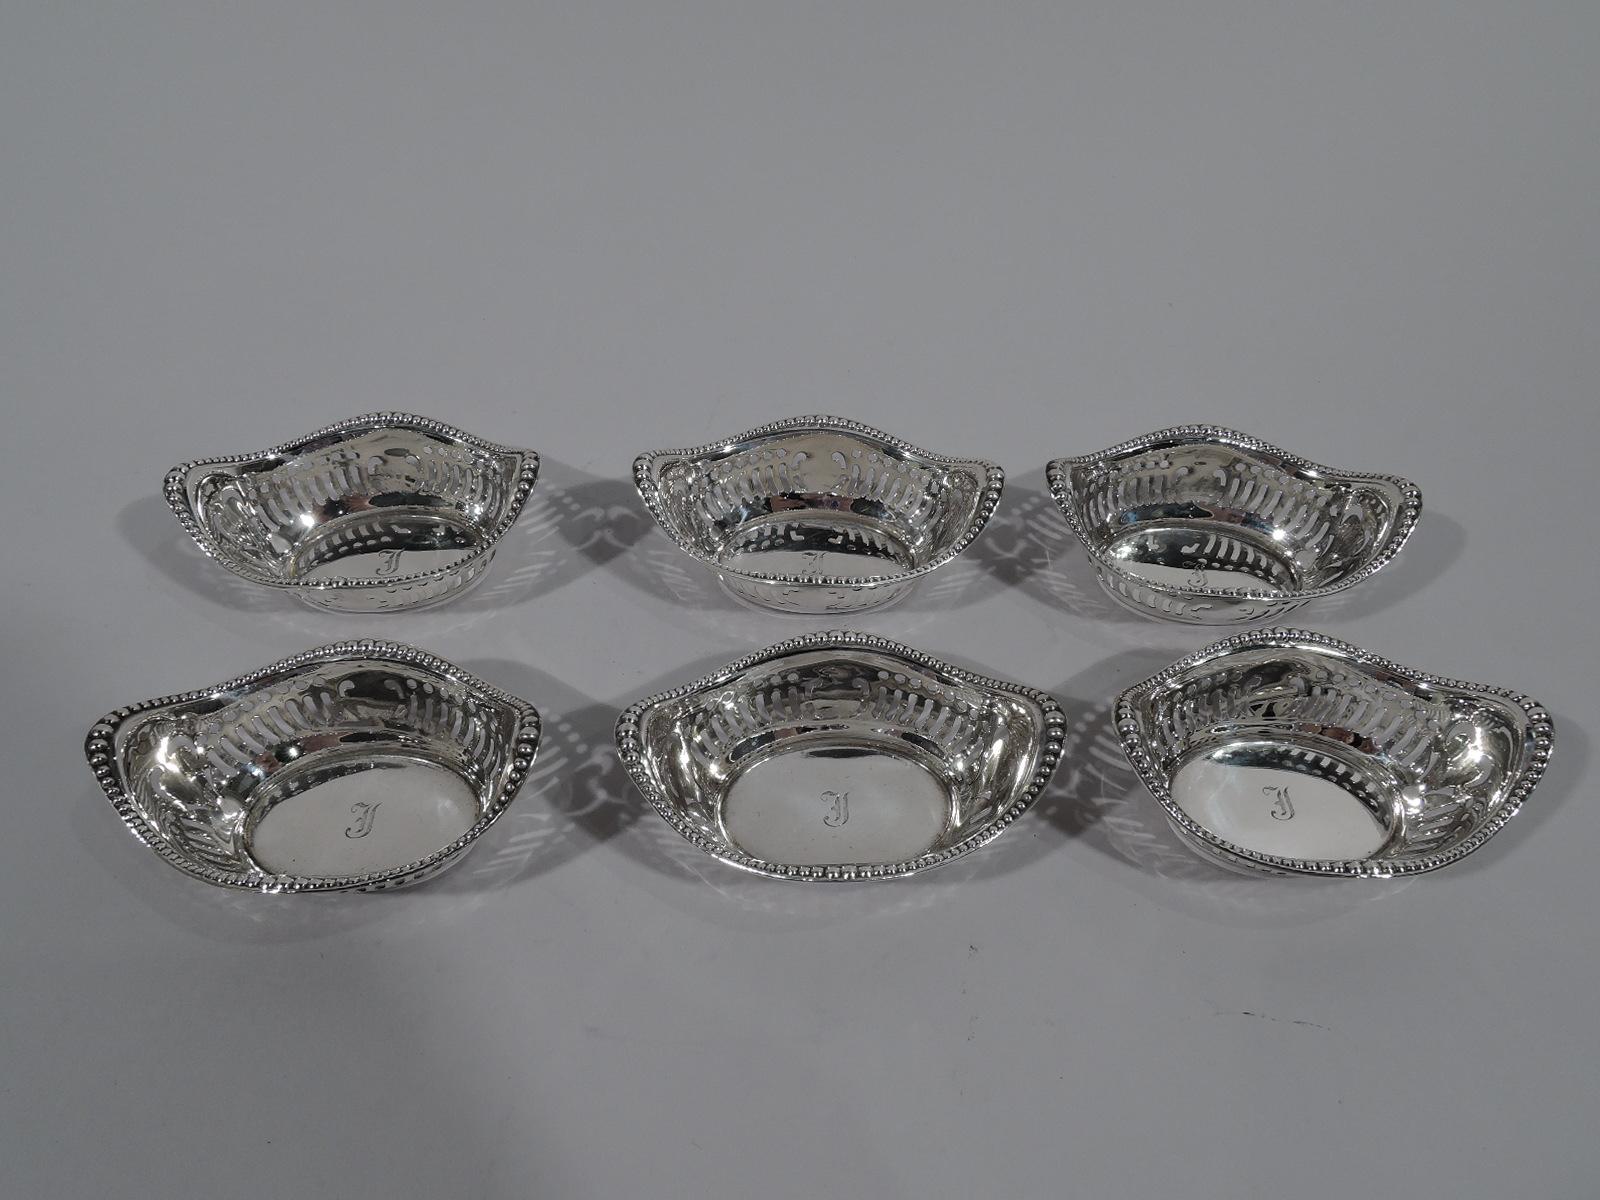 Set of 6 Edwardian sterling silver nut dishes. Made by Gorham in Providence, circa 1910. Each: Boat form with solid oval well. Sides have pierced geometric ornament. Rim wavy and beaded. Single-letter script monogram engraved in well. Fully marked